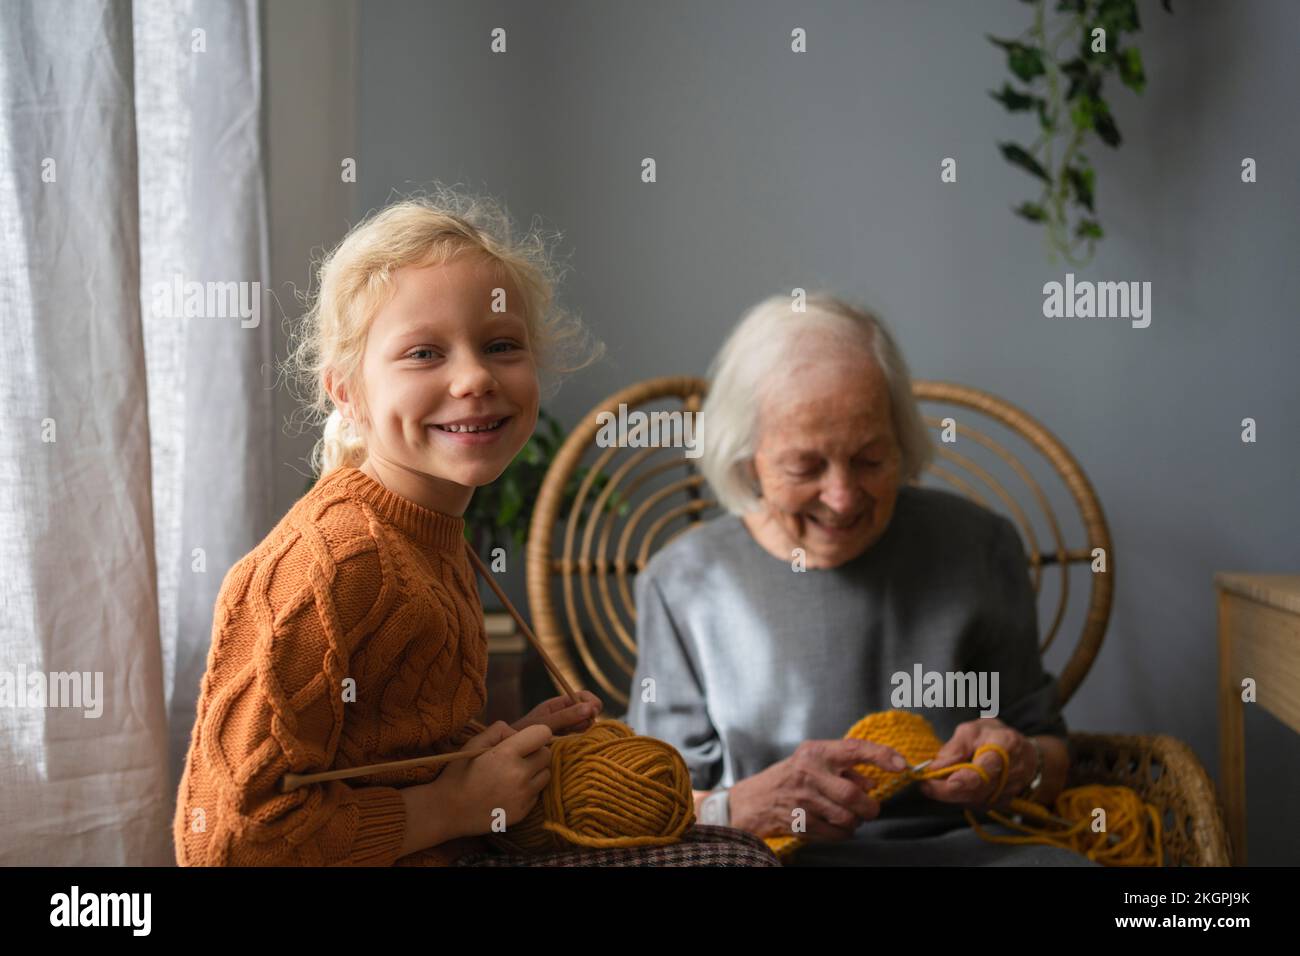 Happy girl holding ball of wool and knitting needle in front of grandmother at home Stock Photo